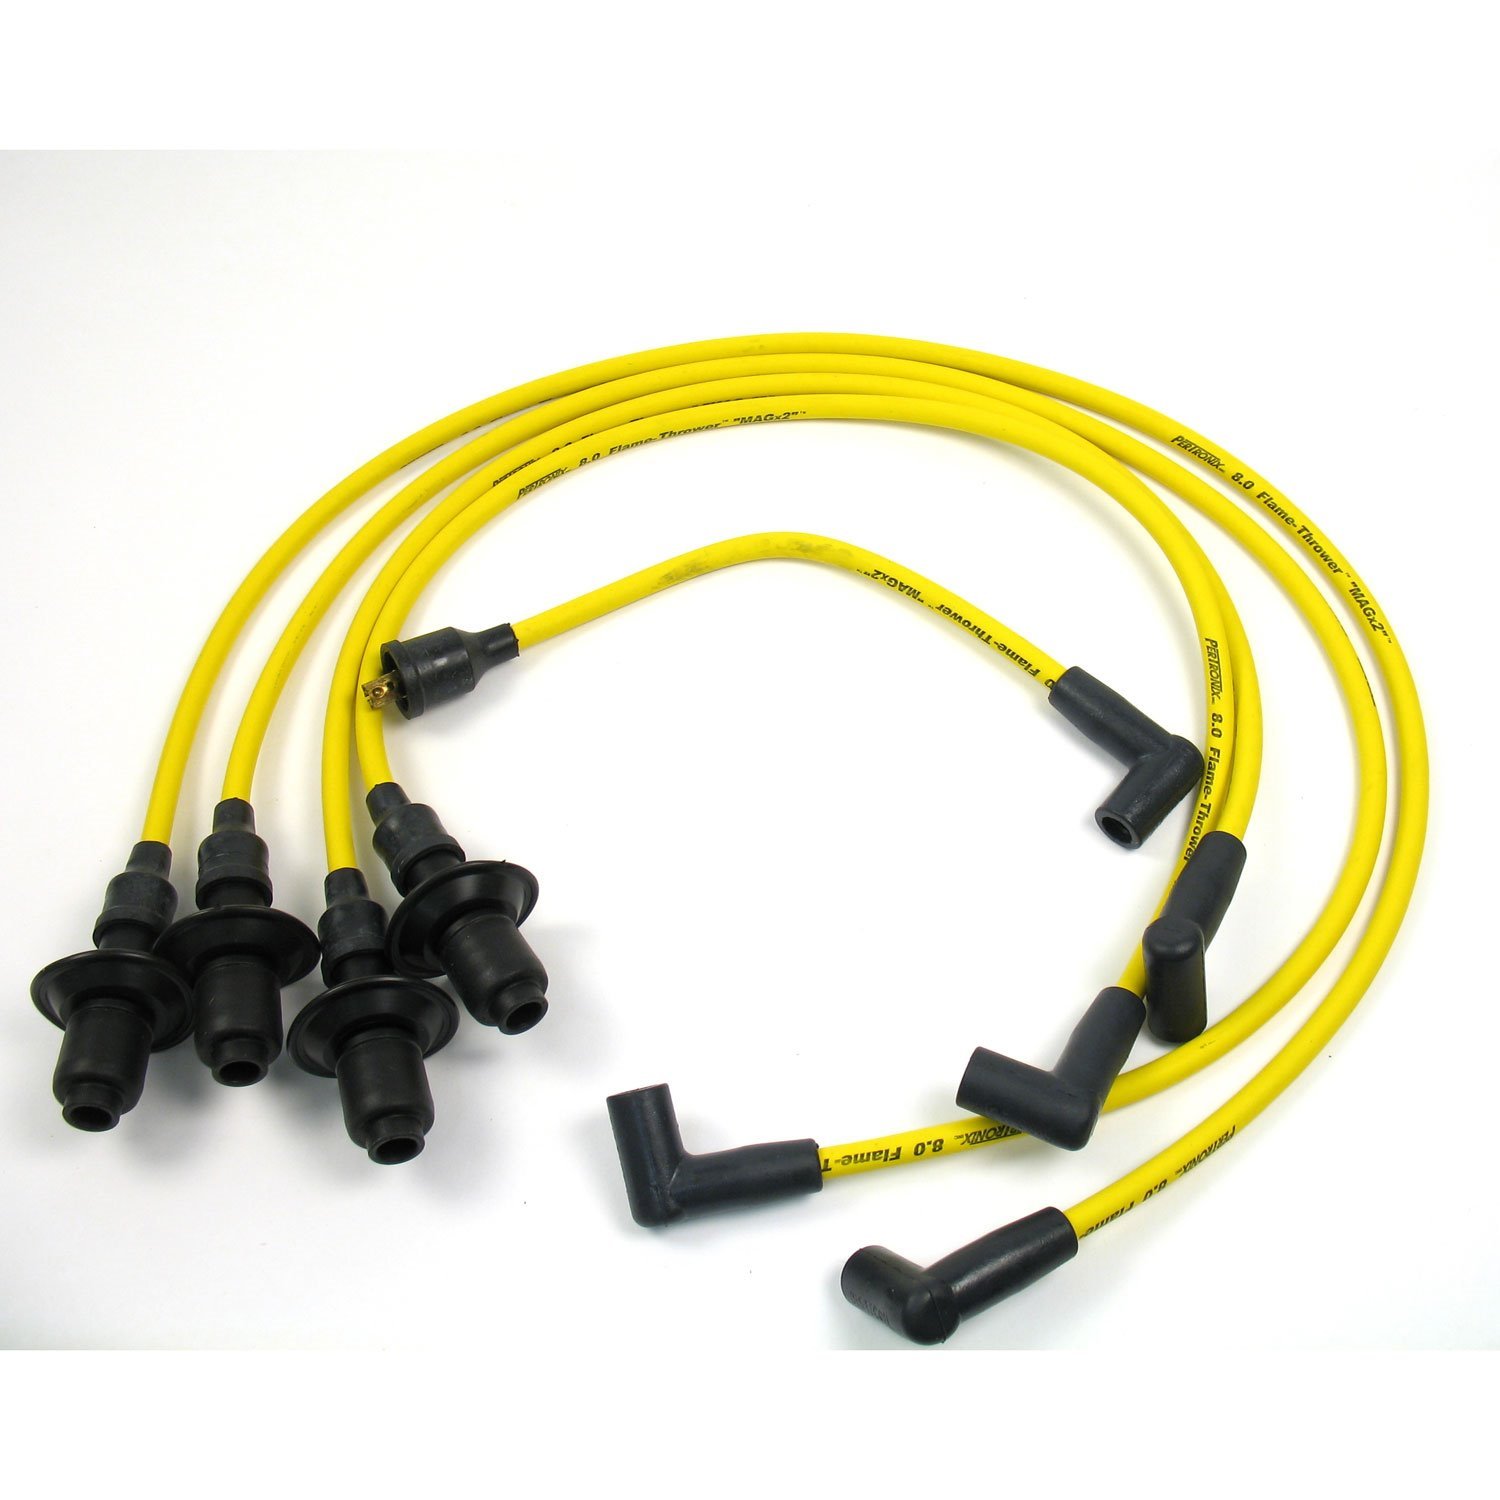 PerTronix 804505 Flame-Thrower Spark Plug Wires 4 cyl